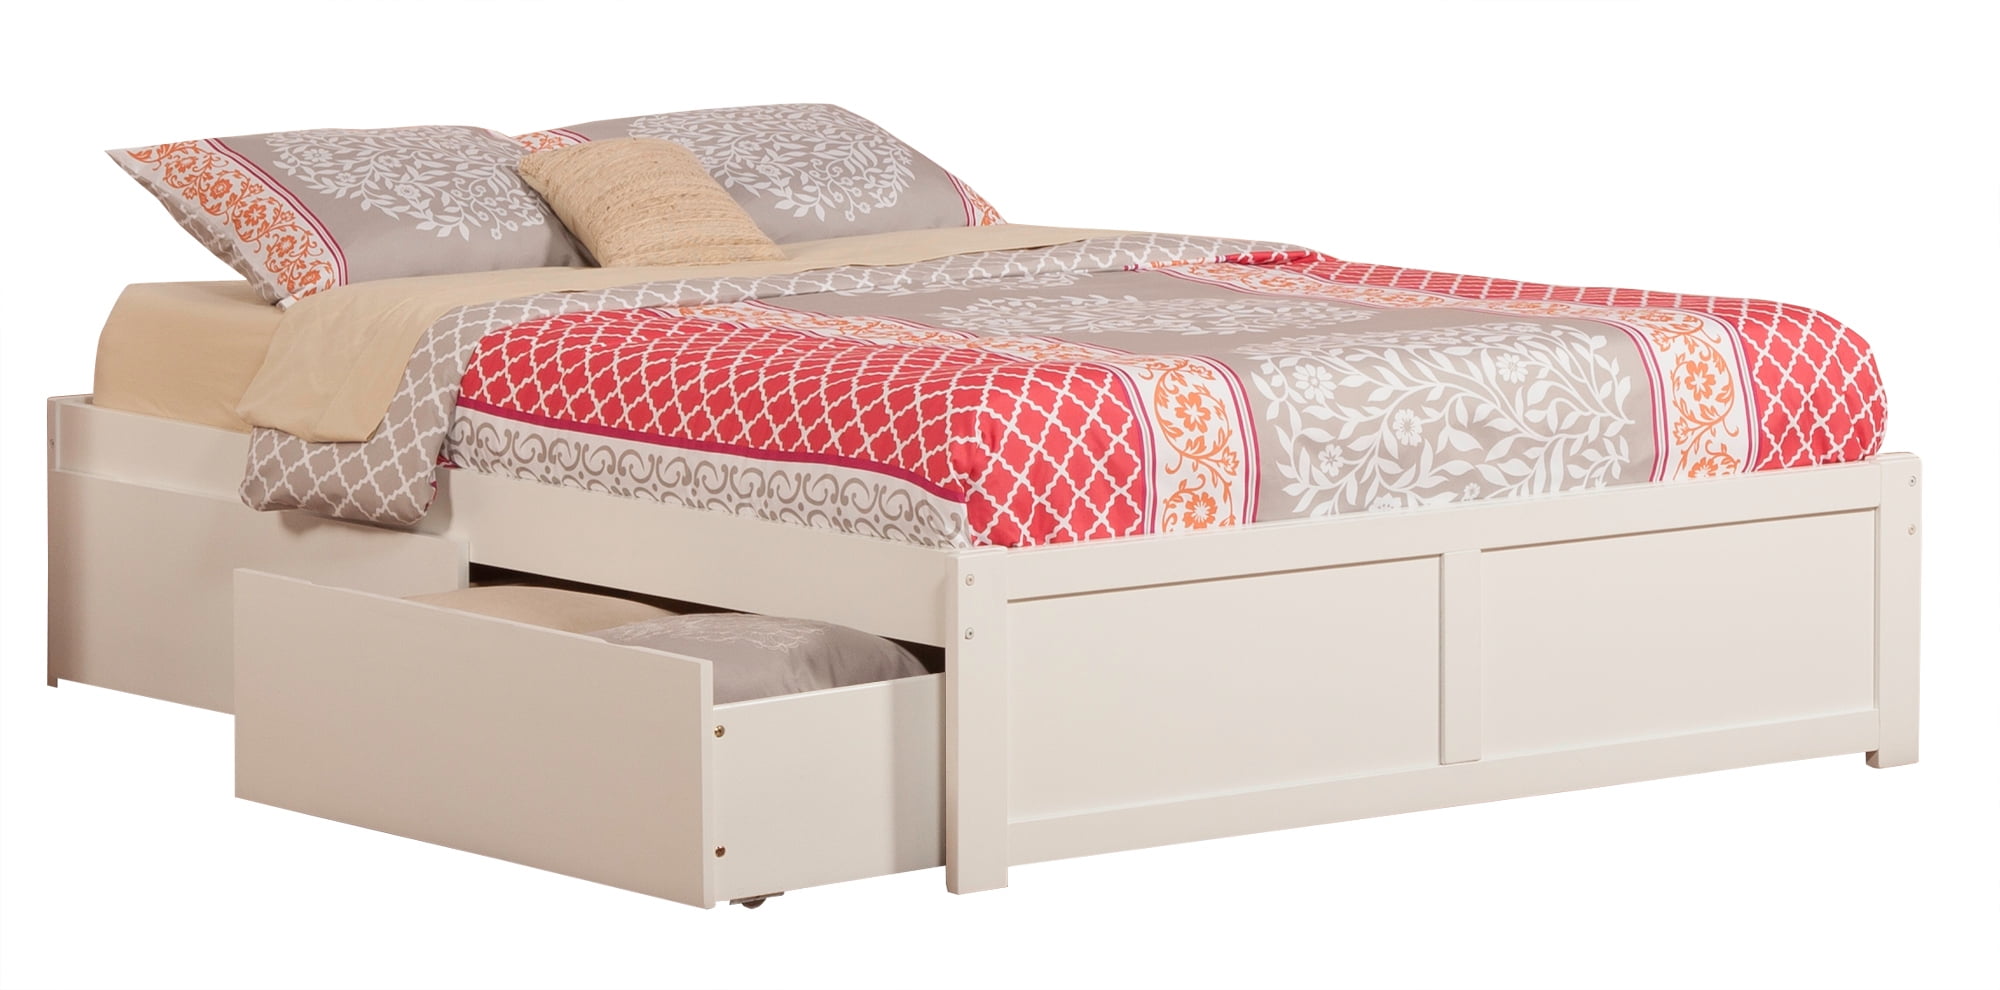 Picture of Atlantic Furniture AR8052112 Concord Flat Panel Foot Board with Urban Bed Drawers, White - King